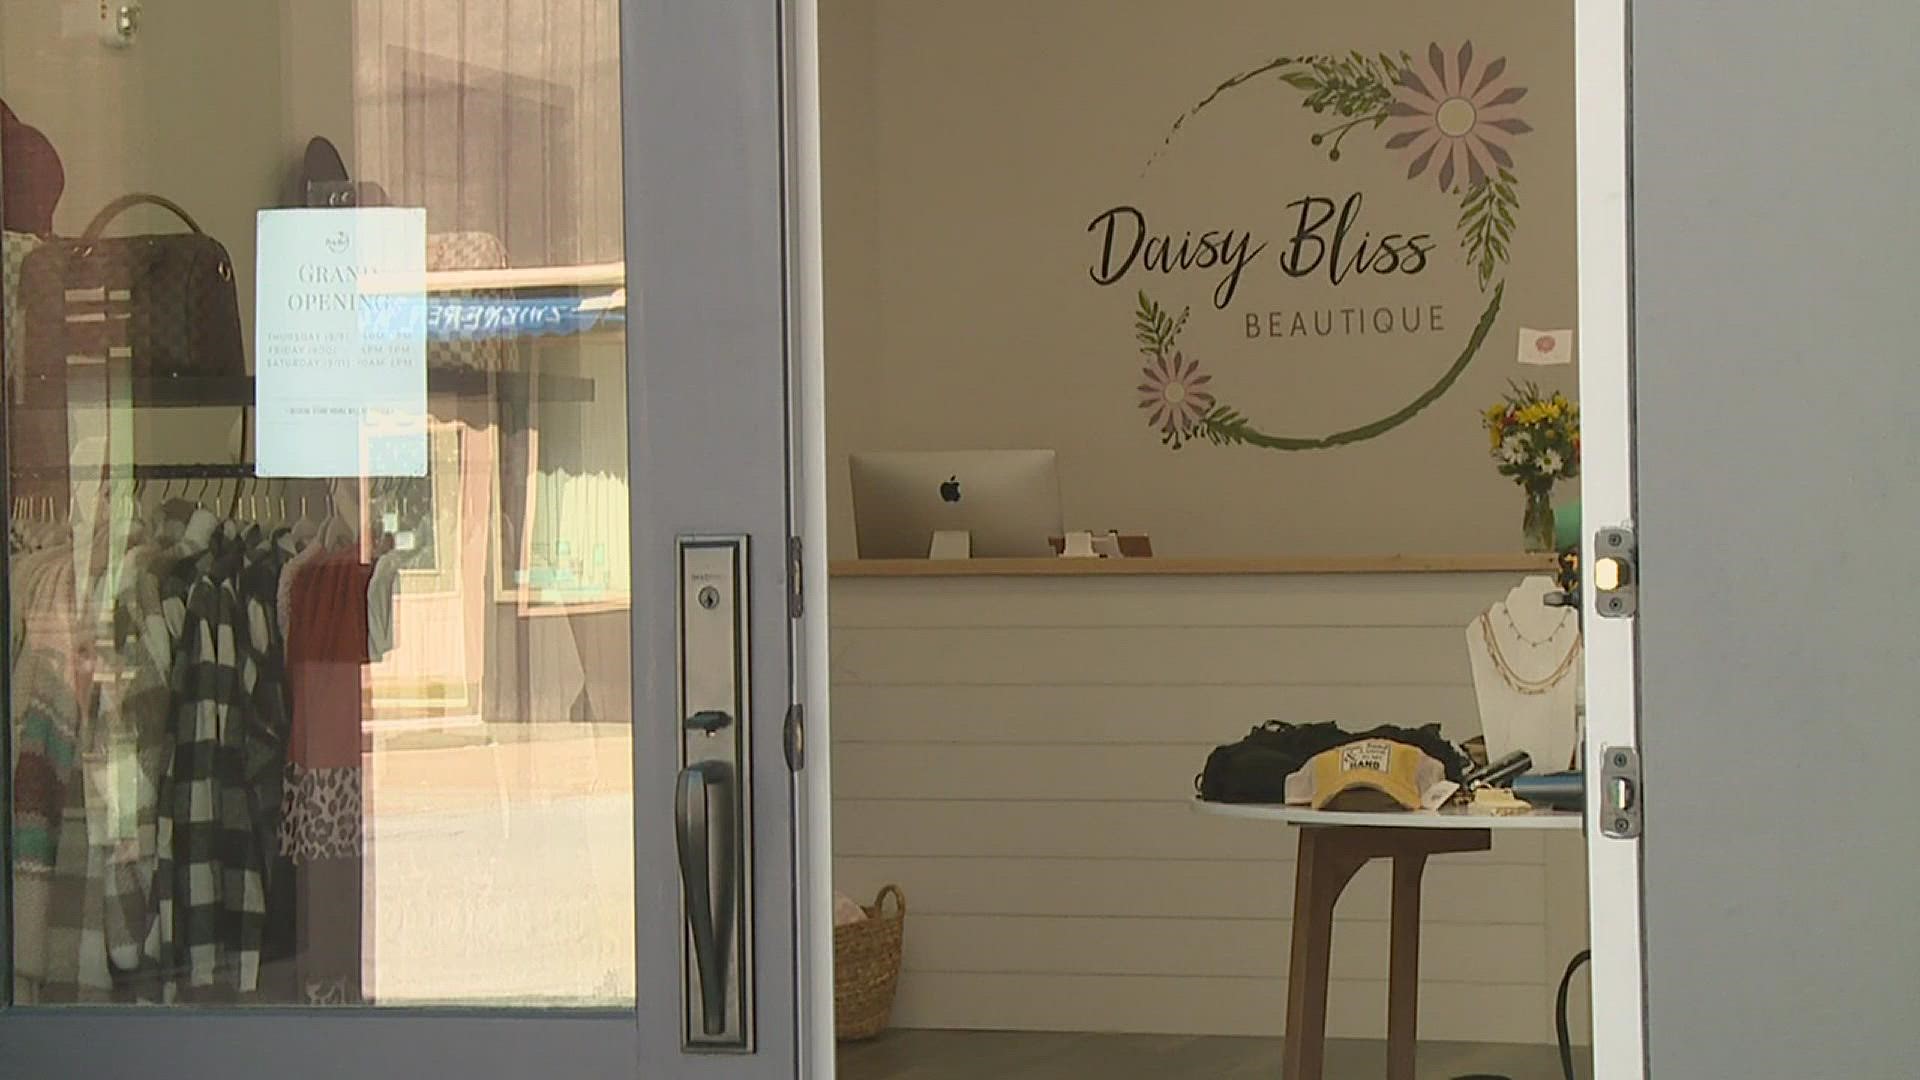 After 3 years of online-only sales, Daisy Bliss opened in downtown Aledo, where empty windows and 'For Sale' signs dot all too many storefronts.